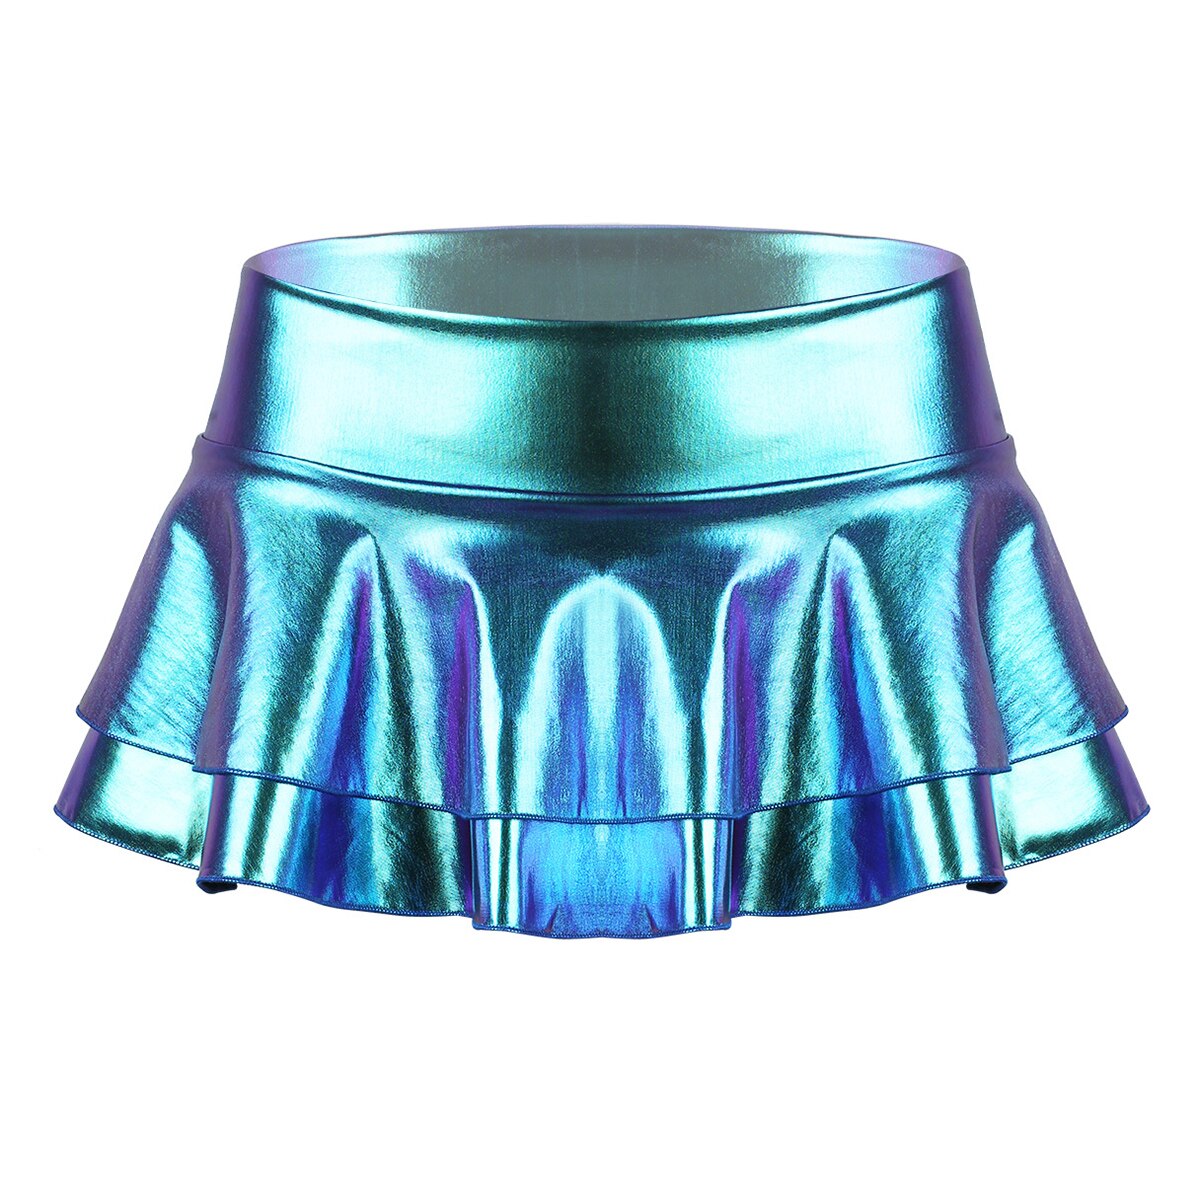 Metallic Shiny Pleated Skirts Womens High Waist Shiny Holographic Flared Rave Dance Bottoms Clubwear Mini Party Skater Skirt